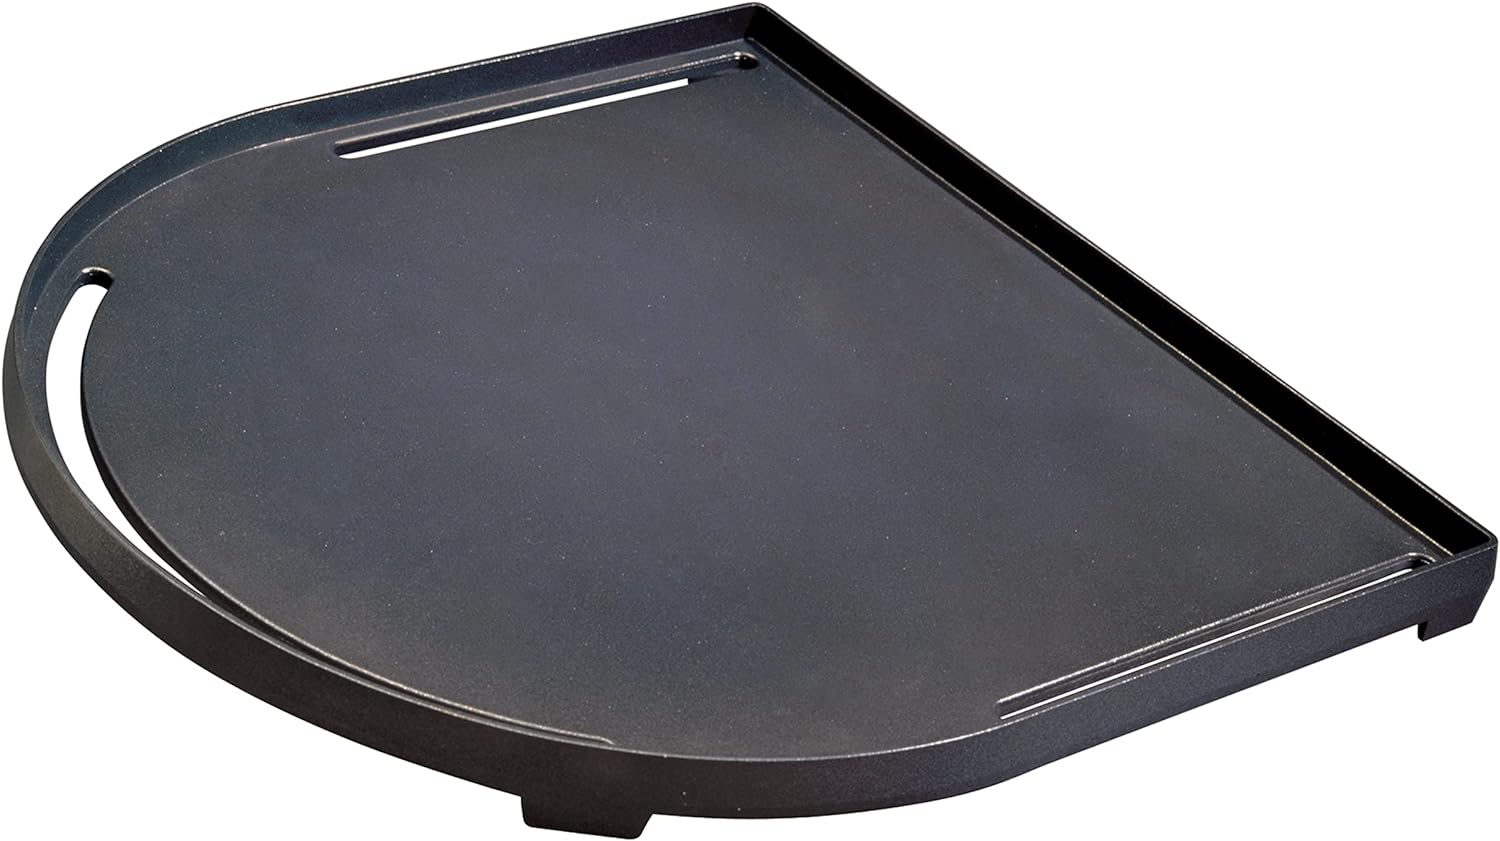 Coleman Swaptop Cast Iron Griddle & Grill Grate for RoadTrip Grills, 142 Sq. In. Cooking Area with Easy-to-Clean Cast Iron Construction, Great for Camping, Tailgating, Home, & More